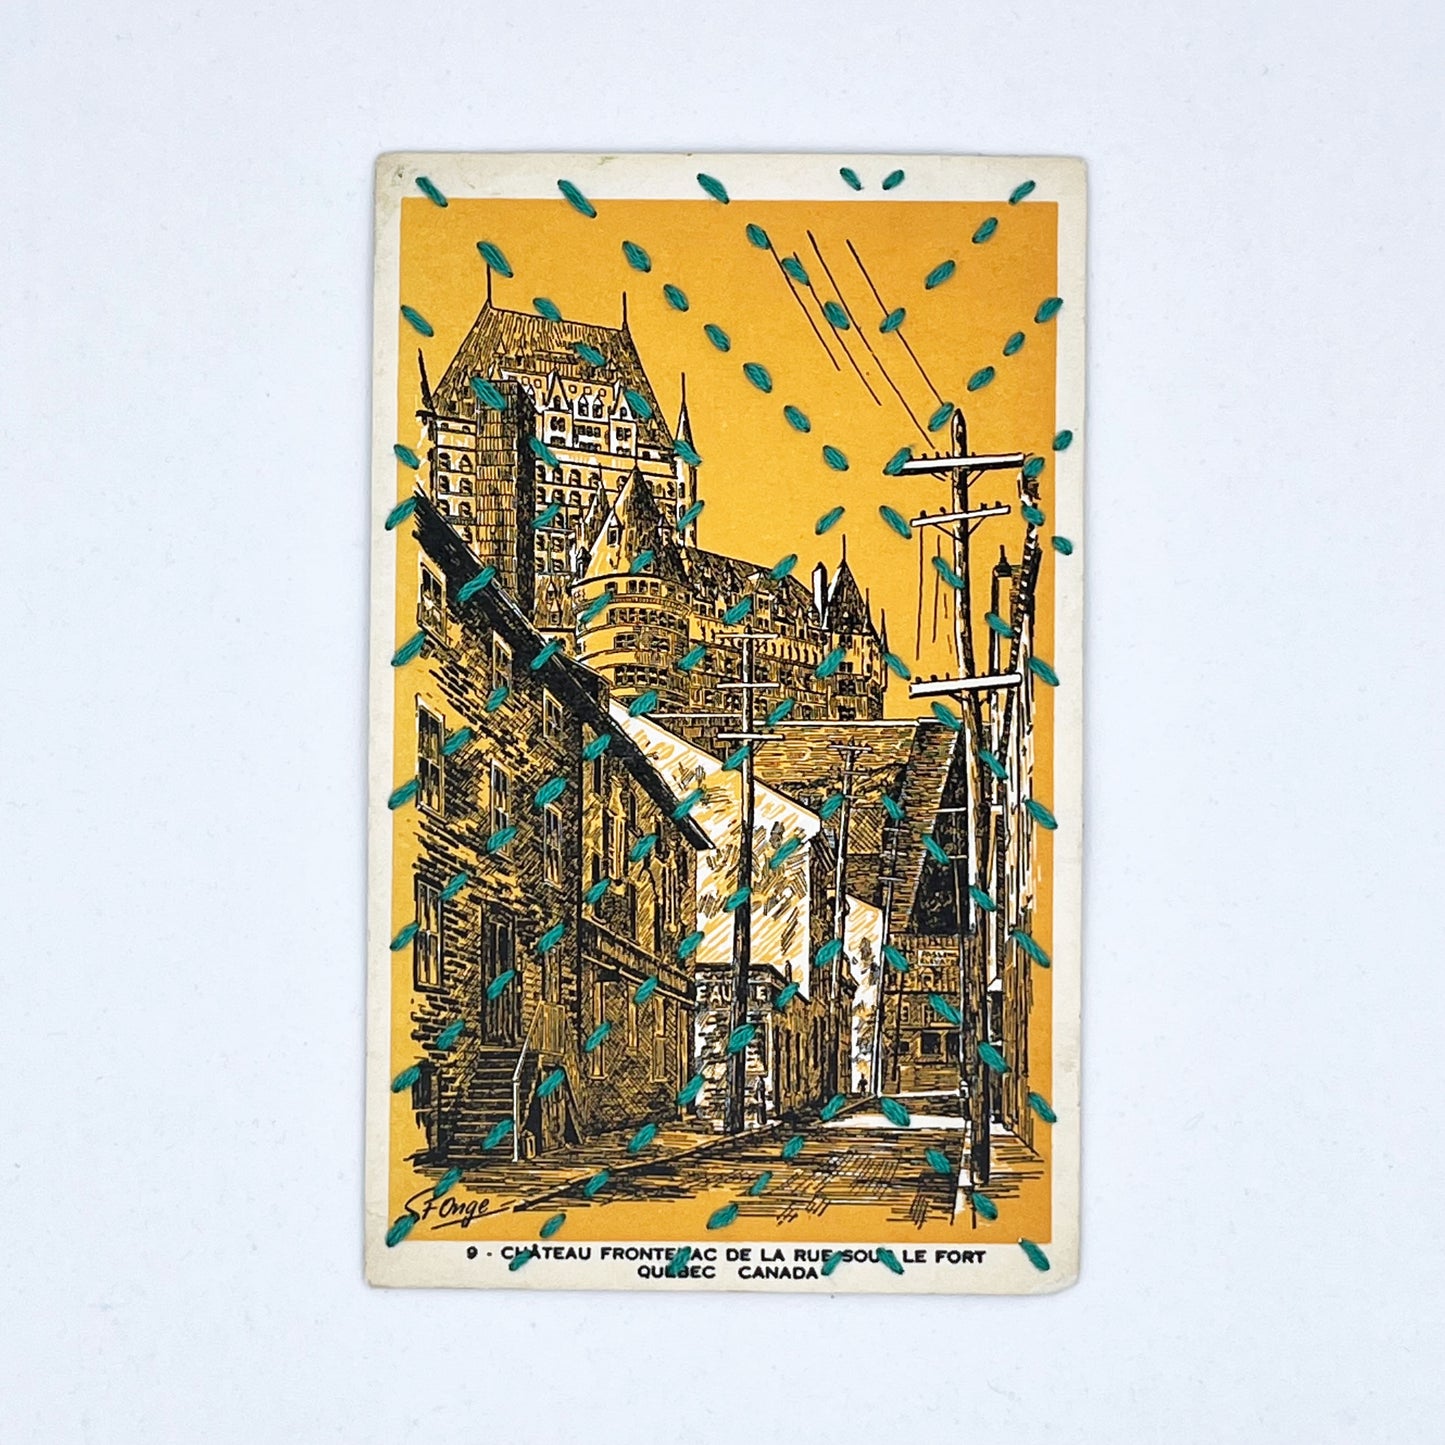 a golden yellow vintage postcard depicting a drawing of the Chateau Frontenac in Quebec, stitched over with running stitches in teal floss in a radiating X pattern